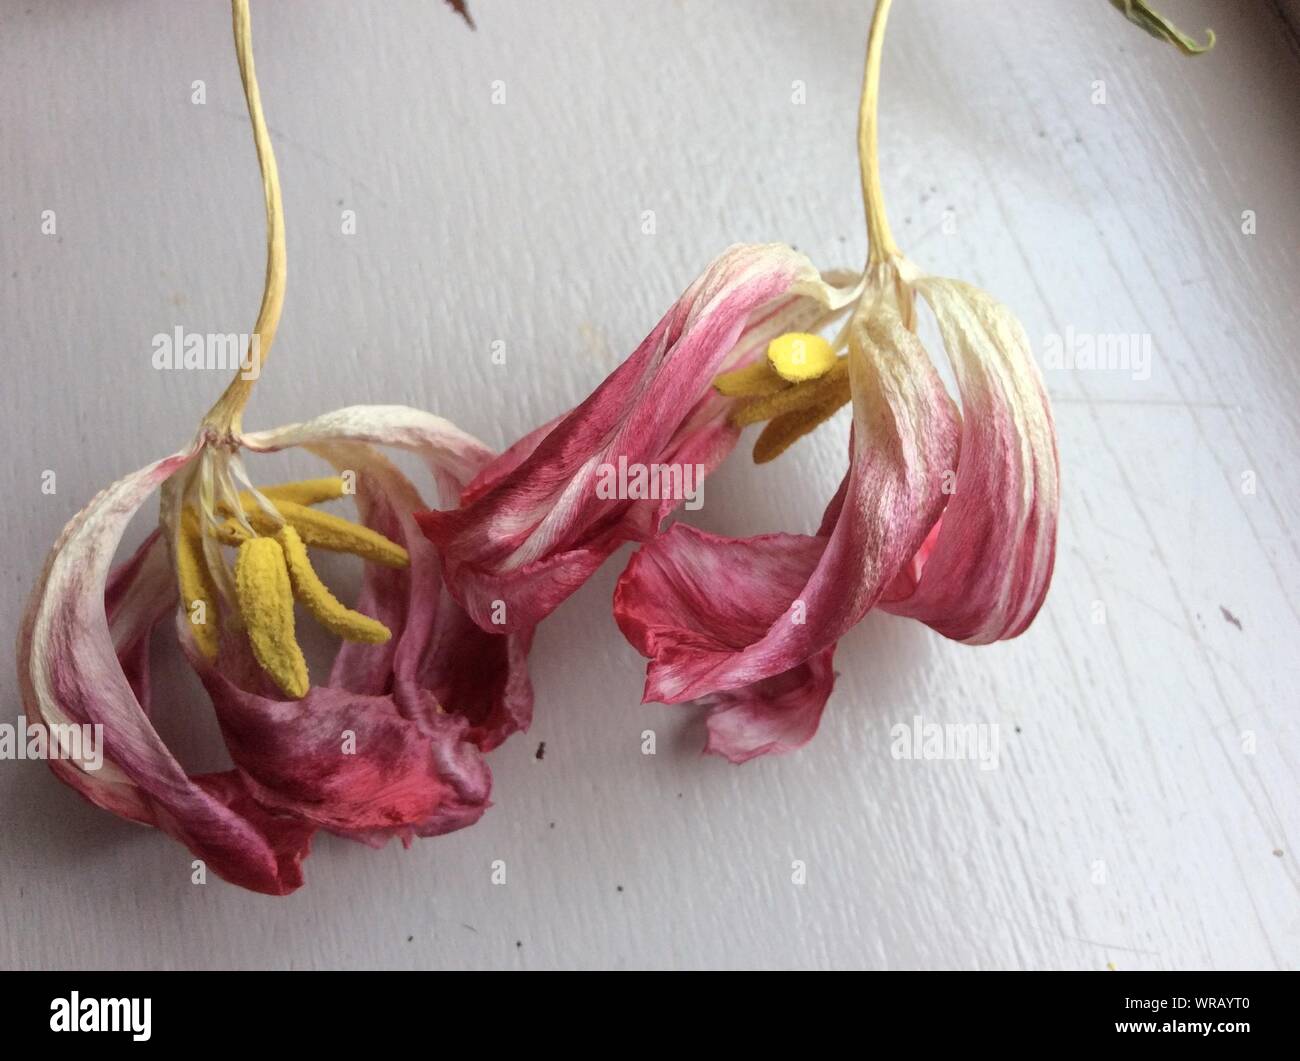 Wilted Pink Lilies On Table Stock Photo